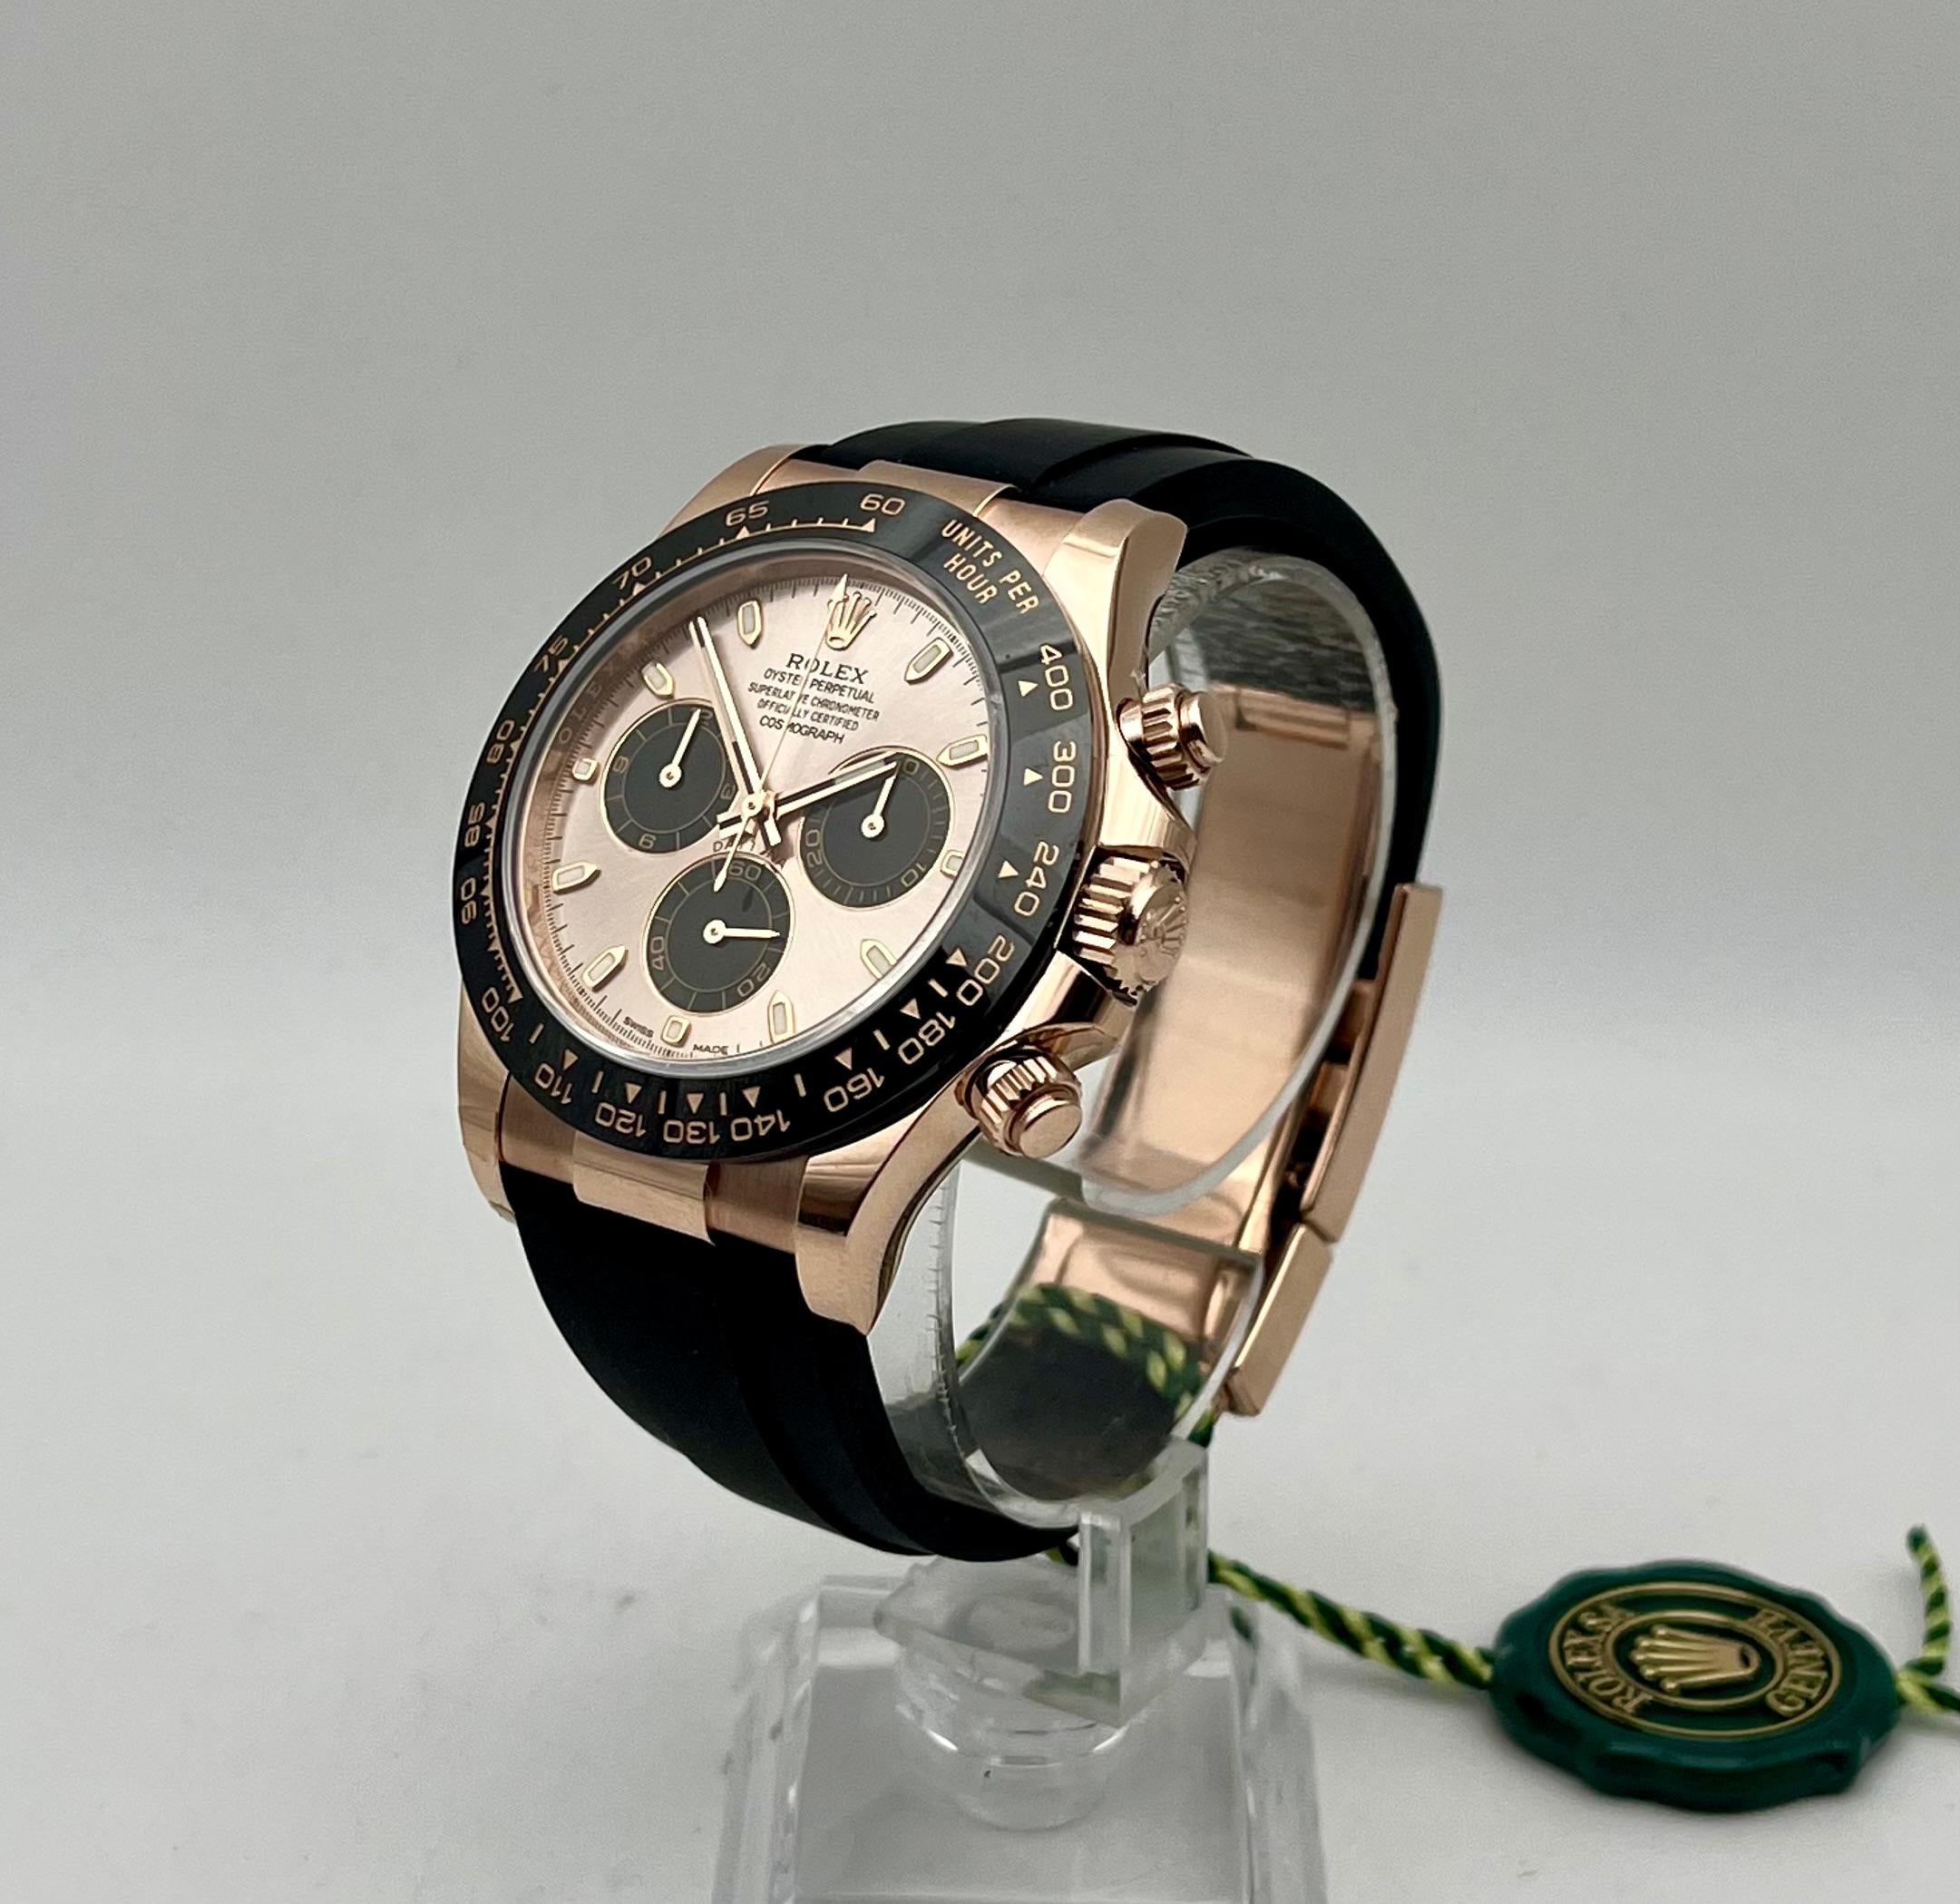 Cosmograph Daytona in 18 ct Everose gold with a bright black and Sundust dial and an Oysterflex bracelet, features a black Cerachrom bezel with tachymetric scale.
The 18 ct gold versions of the Cosmograph Daytona with a Cerachrom bezel are available